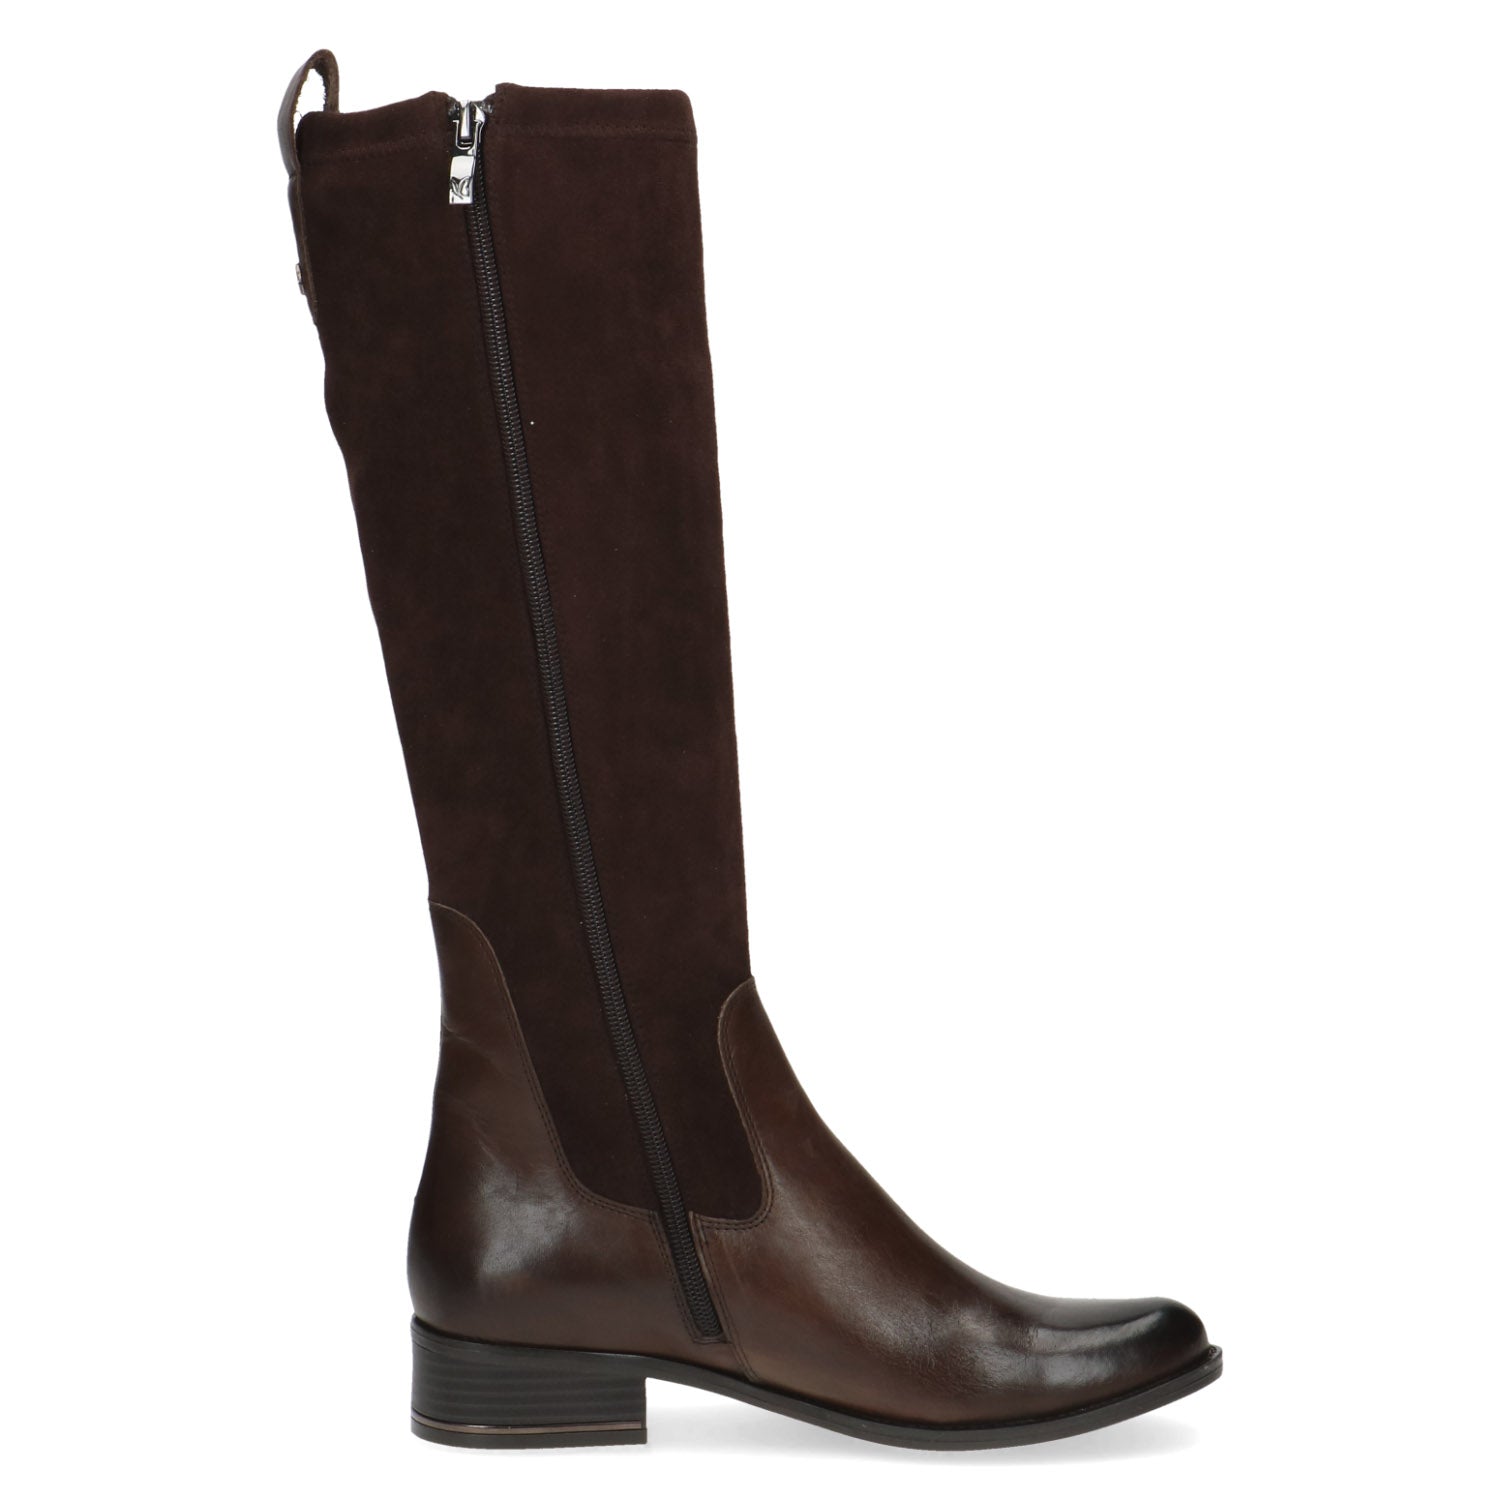 Inside view of the dark brown knee high boot.